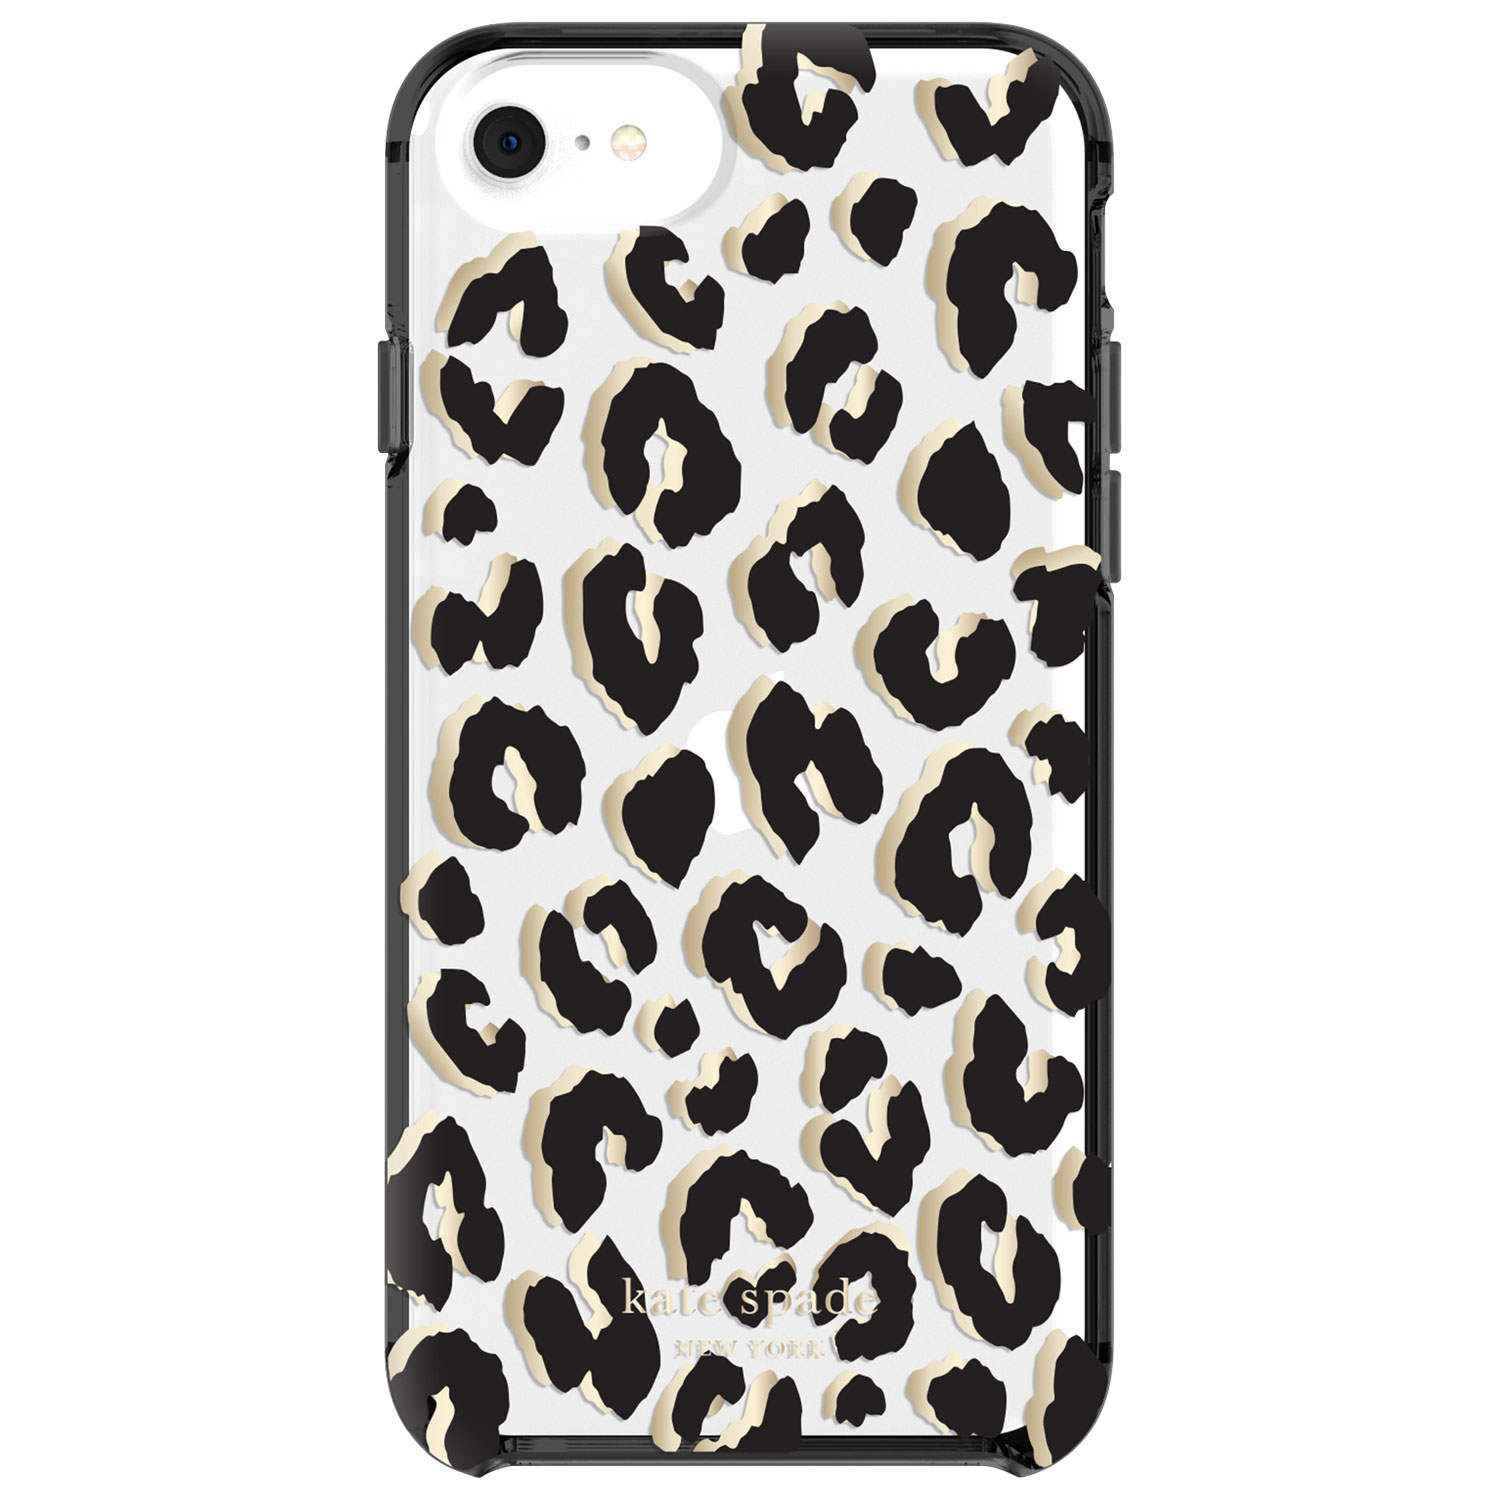 kate spade new york Fitted Hard Shell Case for iPhone SE (3rd Gen/2nd Gen) - Leopard